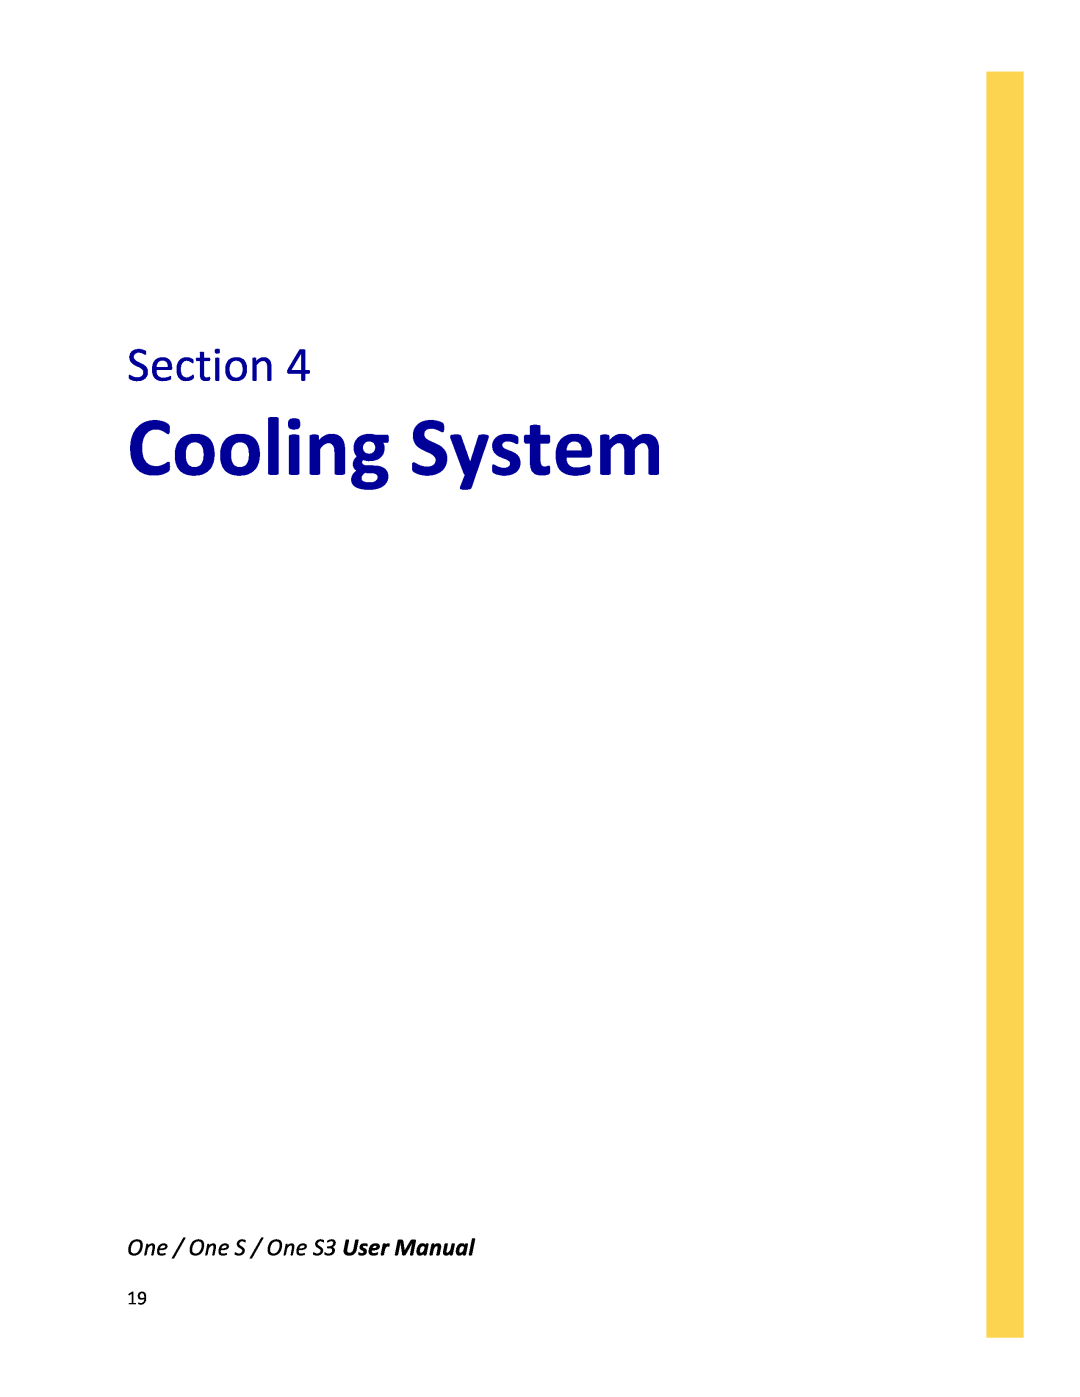 Antec ONE S3 user manual Cooling System, Section, One / One S / One S3 User Manual 